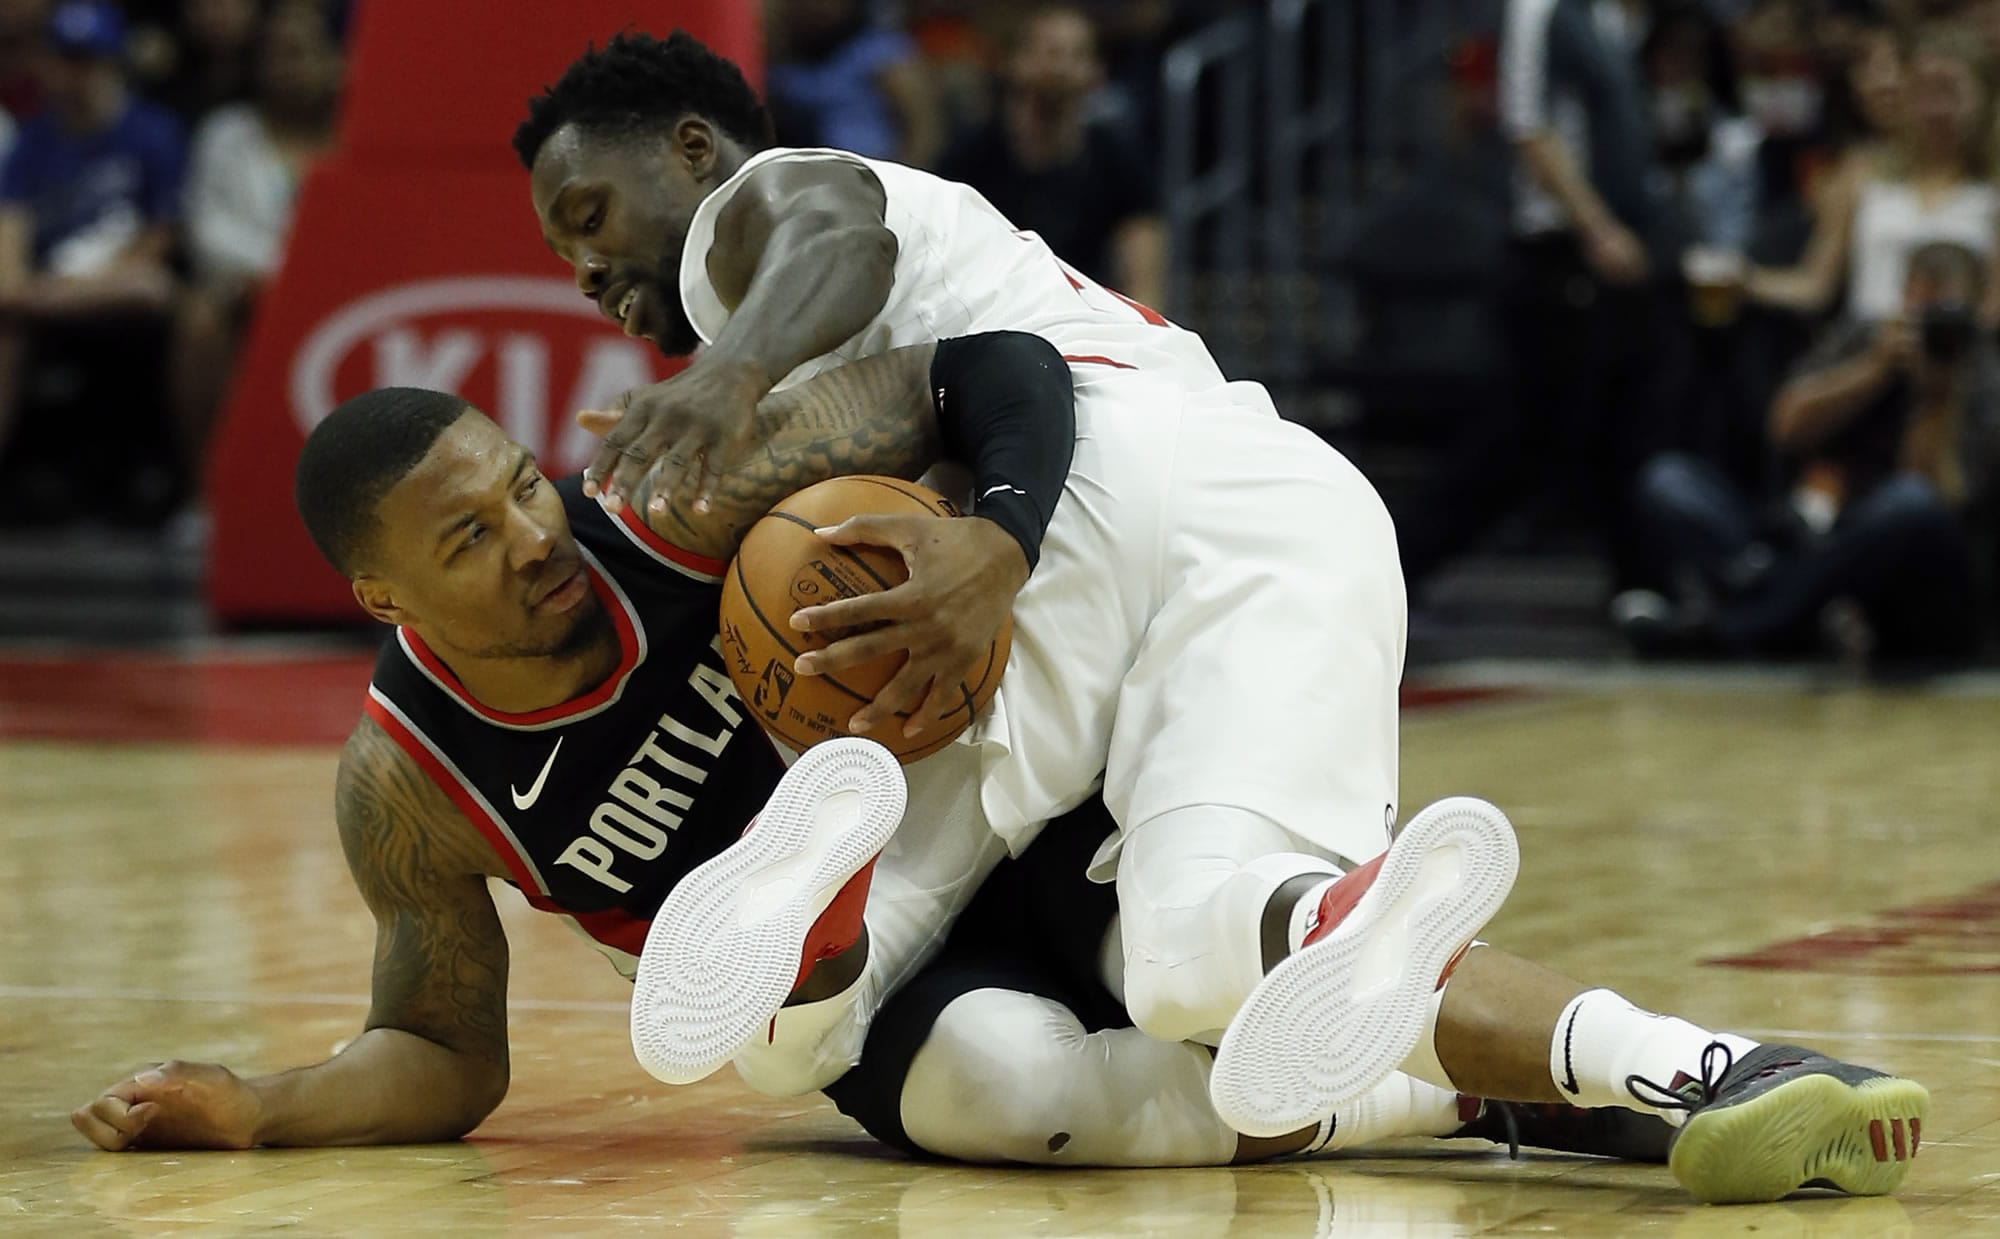 Portland Trail Blazers guard Damian Lillard, left, grabs the ball, competing with Los Angeles Clippers guard Patrick Beverley, right, during the second half of a preseason NBA basketball game in Los Angeles, Sunday, Oct. 8, 2017.